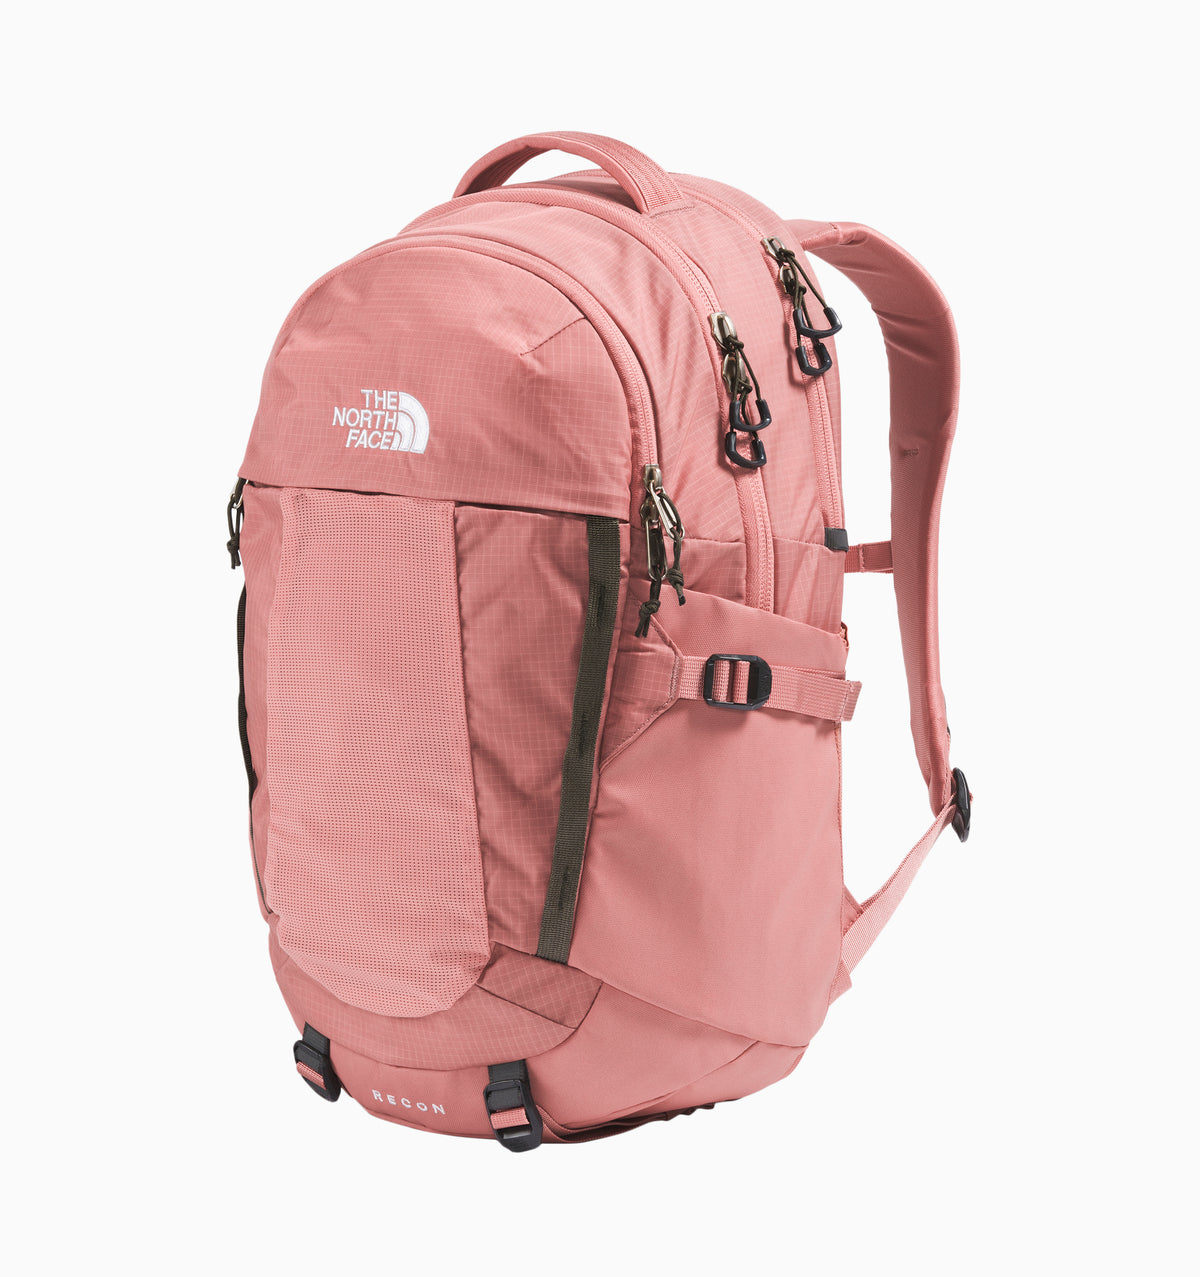 The North Face 18 Women's Recon Backpack 30L - Light Mahogany